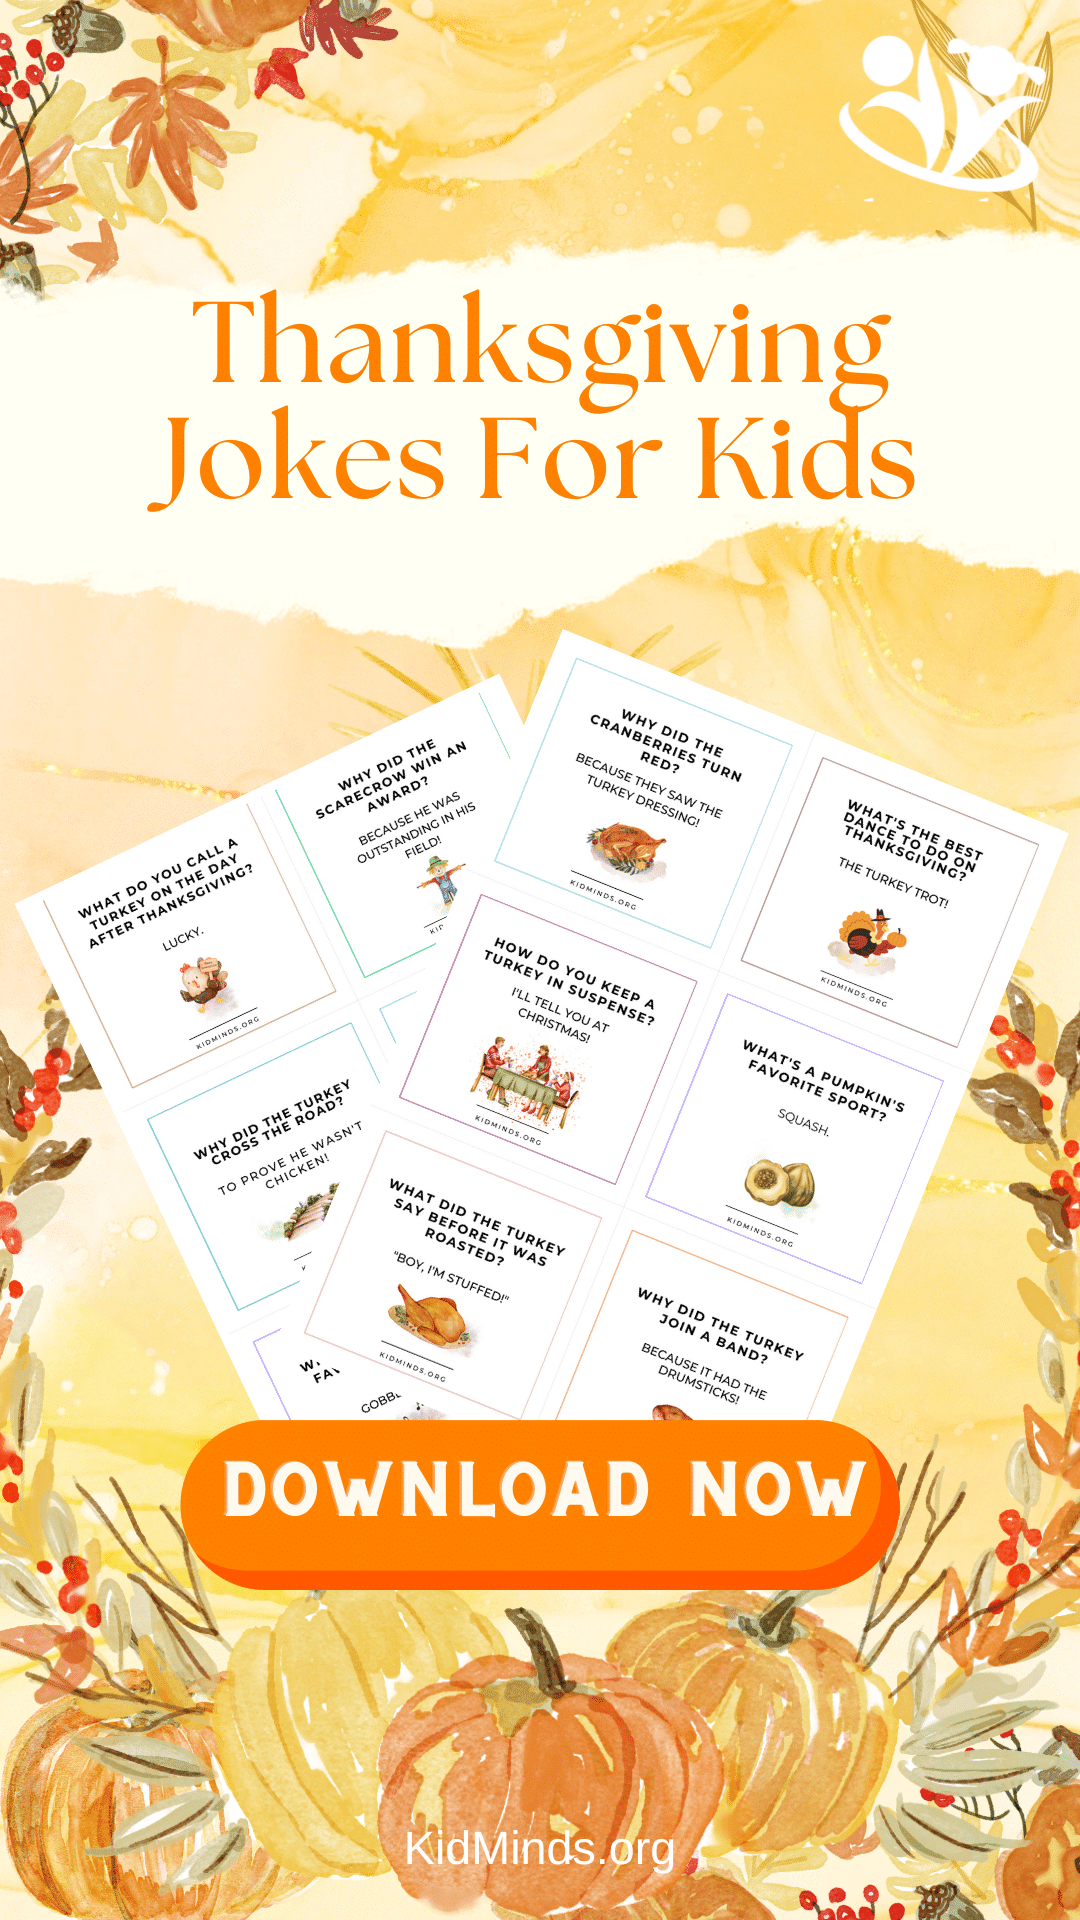 Get ready for some belly laughs this November with these hilarious Thanksgiving jokes perfect for kids.  #kidsactivities #kidjokes #laughingkidslearn #formoms #Thanksgiving #Thanksgivingjokes #turkeyjokes #pilgrimriddles